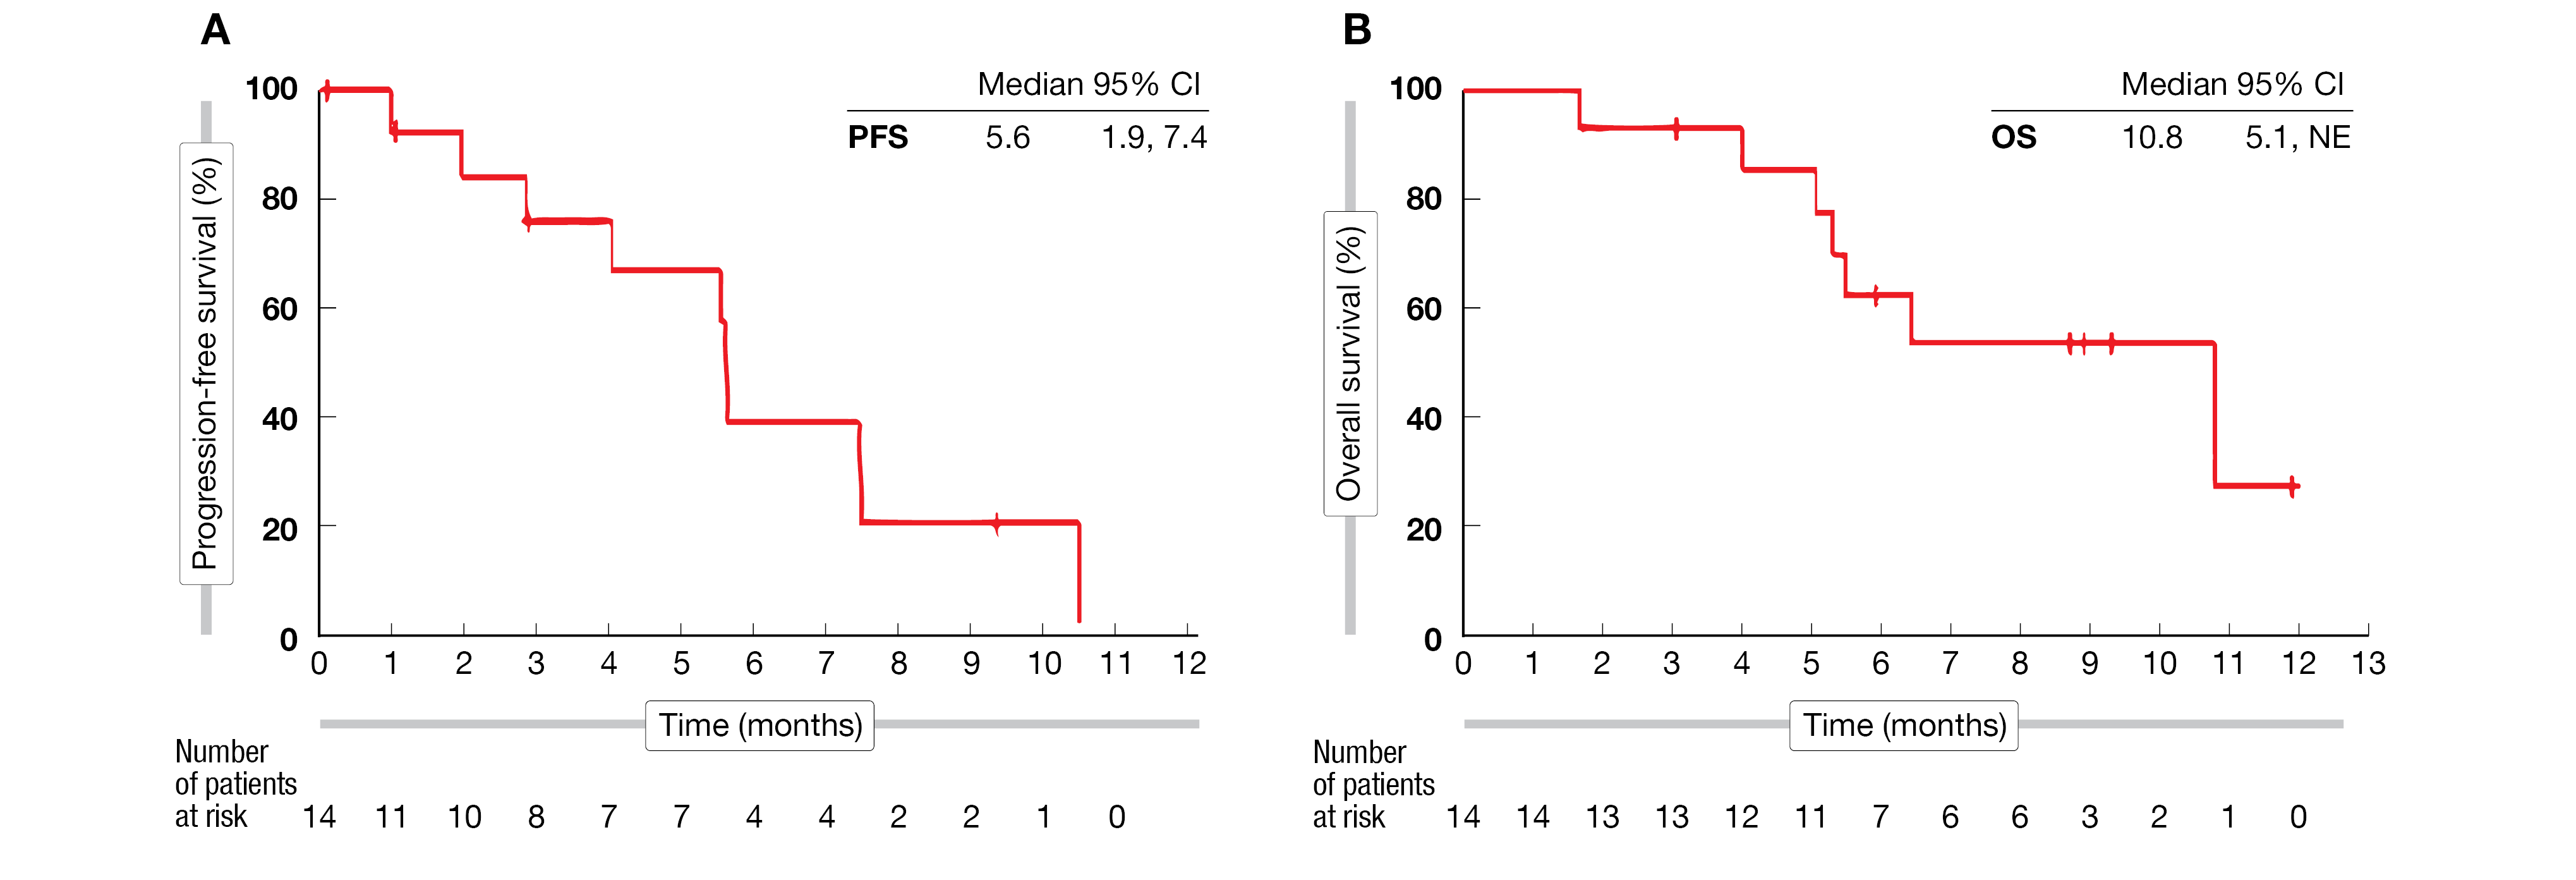 Figure 2: Median progression-free survival (A) and median overall survival (B) after administration of CT041.